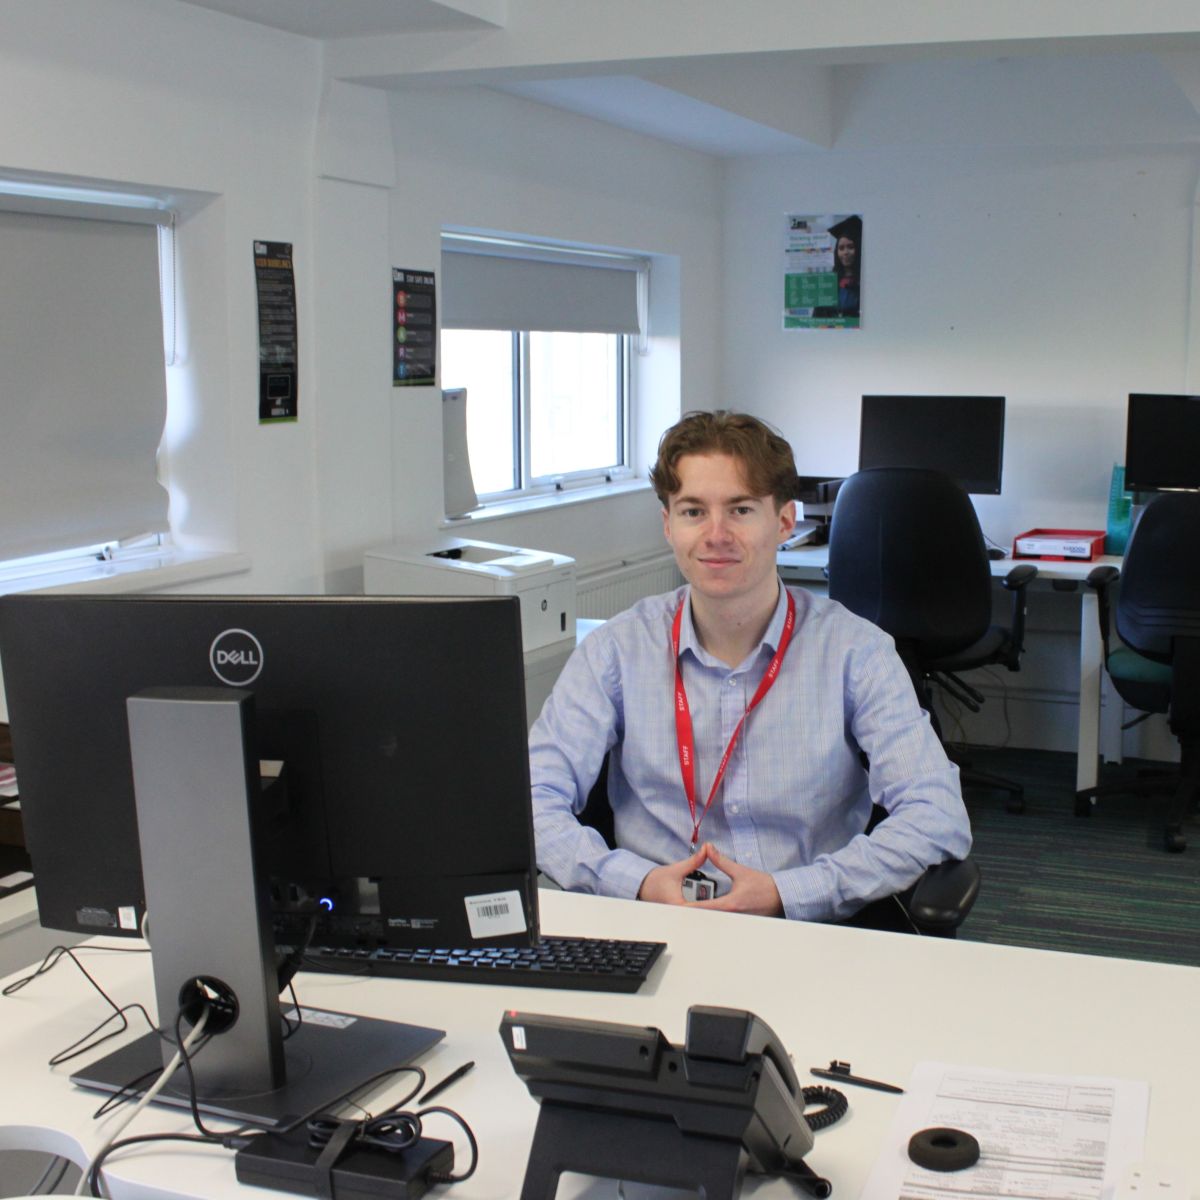 Administration Apprentice, Nathan